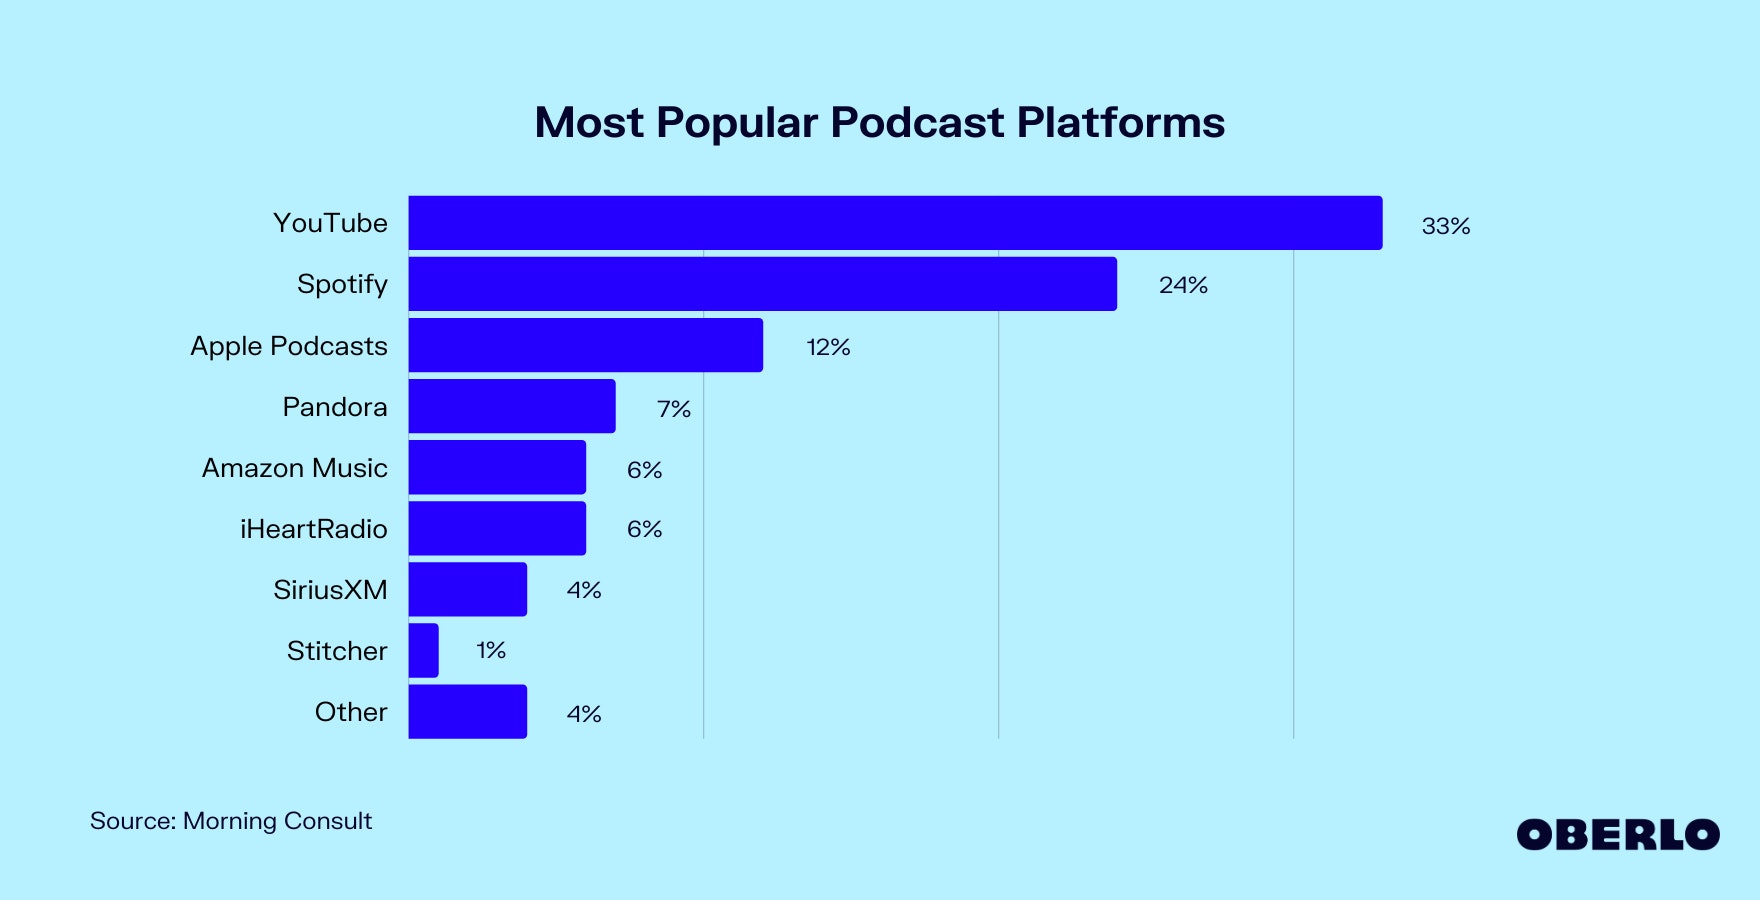 Chart showing the Most Popular Podcast Platforms